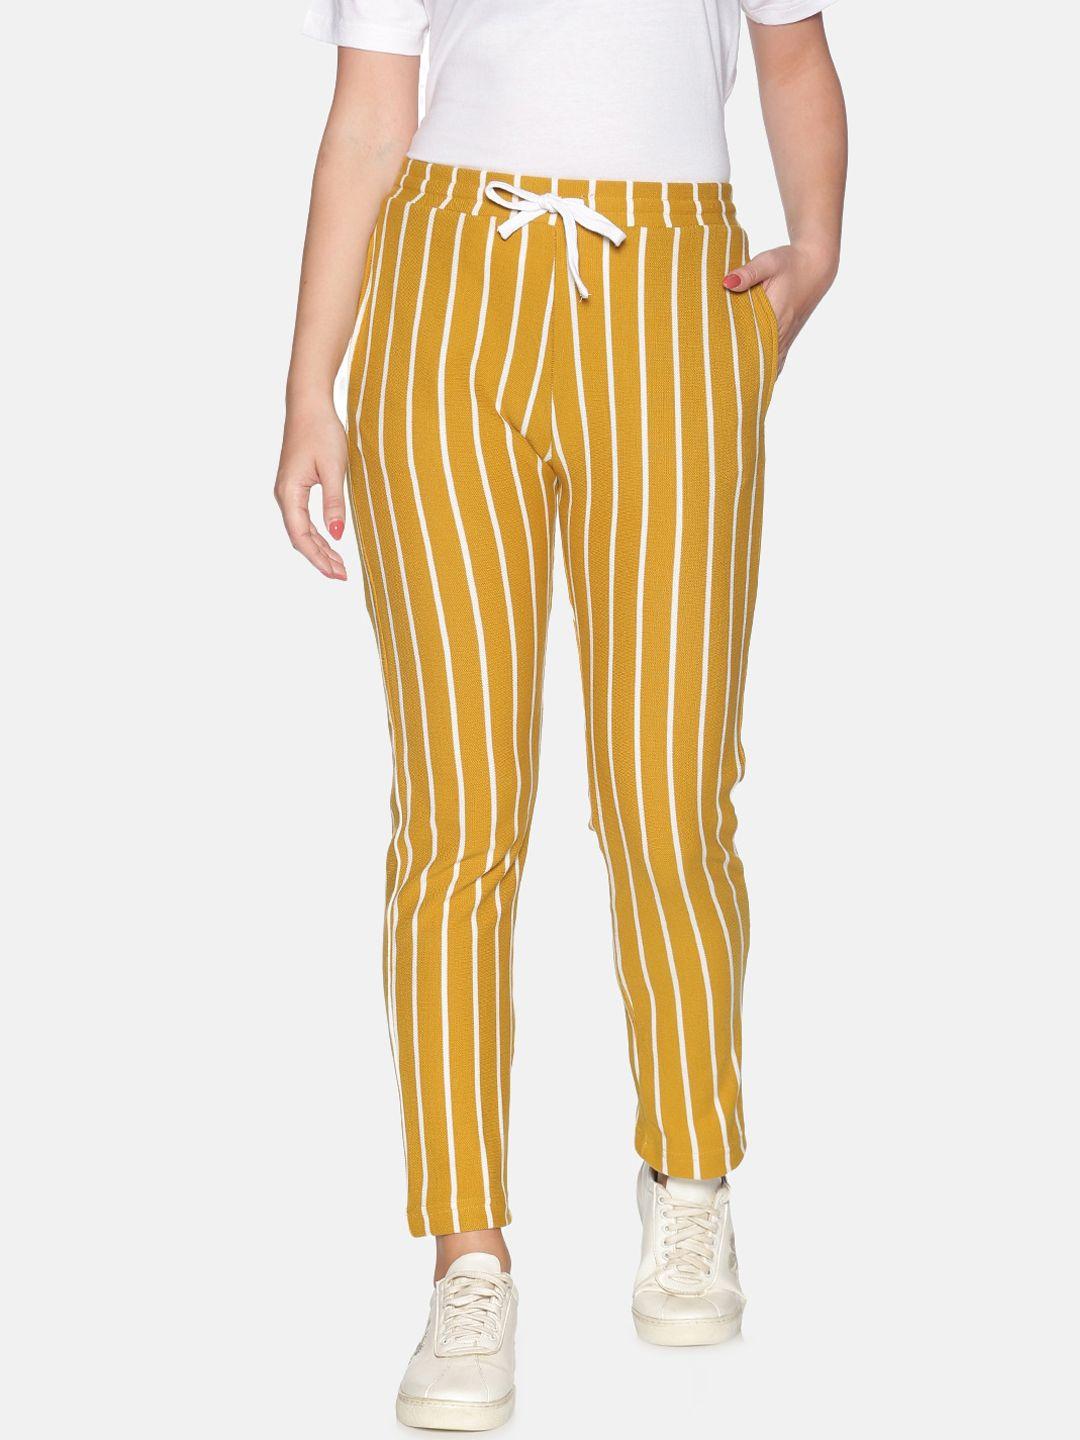 campus sutra women mustard yellow & white striped straight-fit cotton track pants